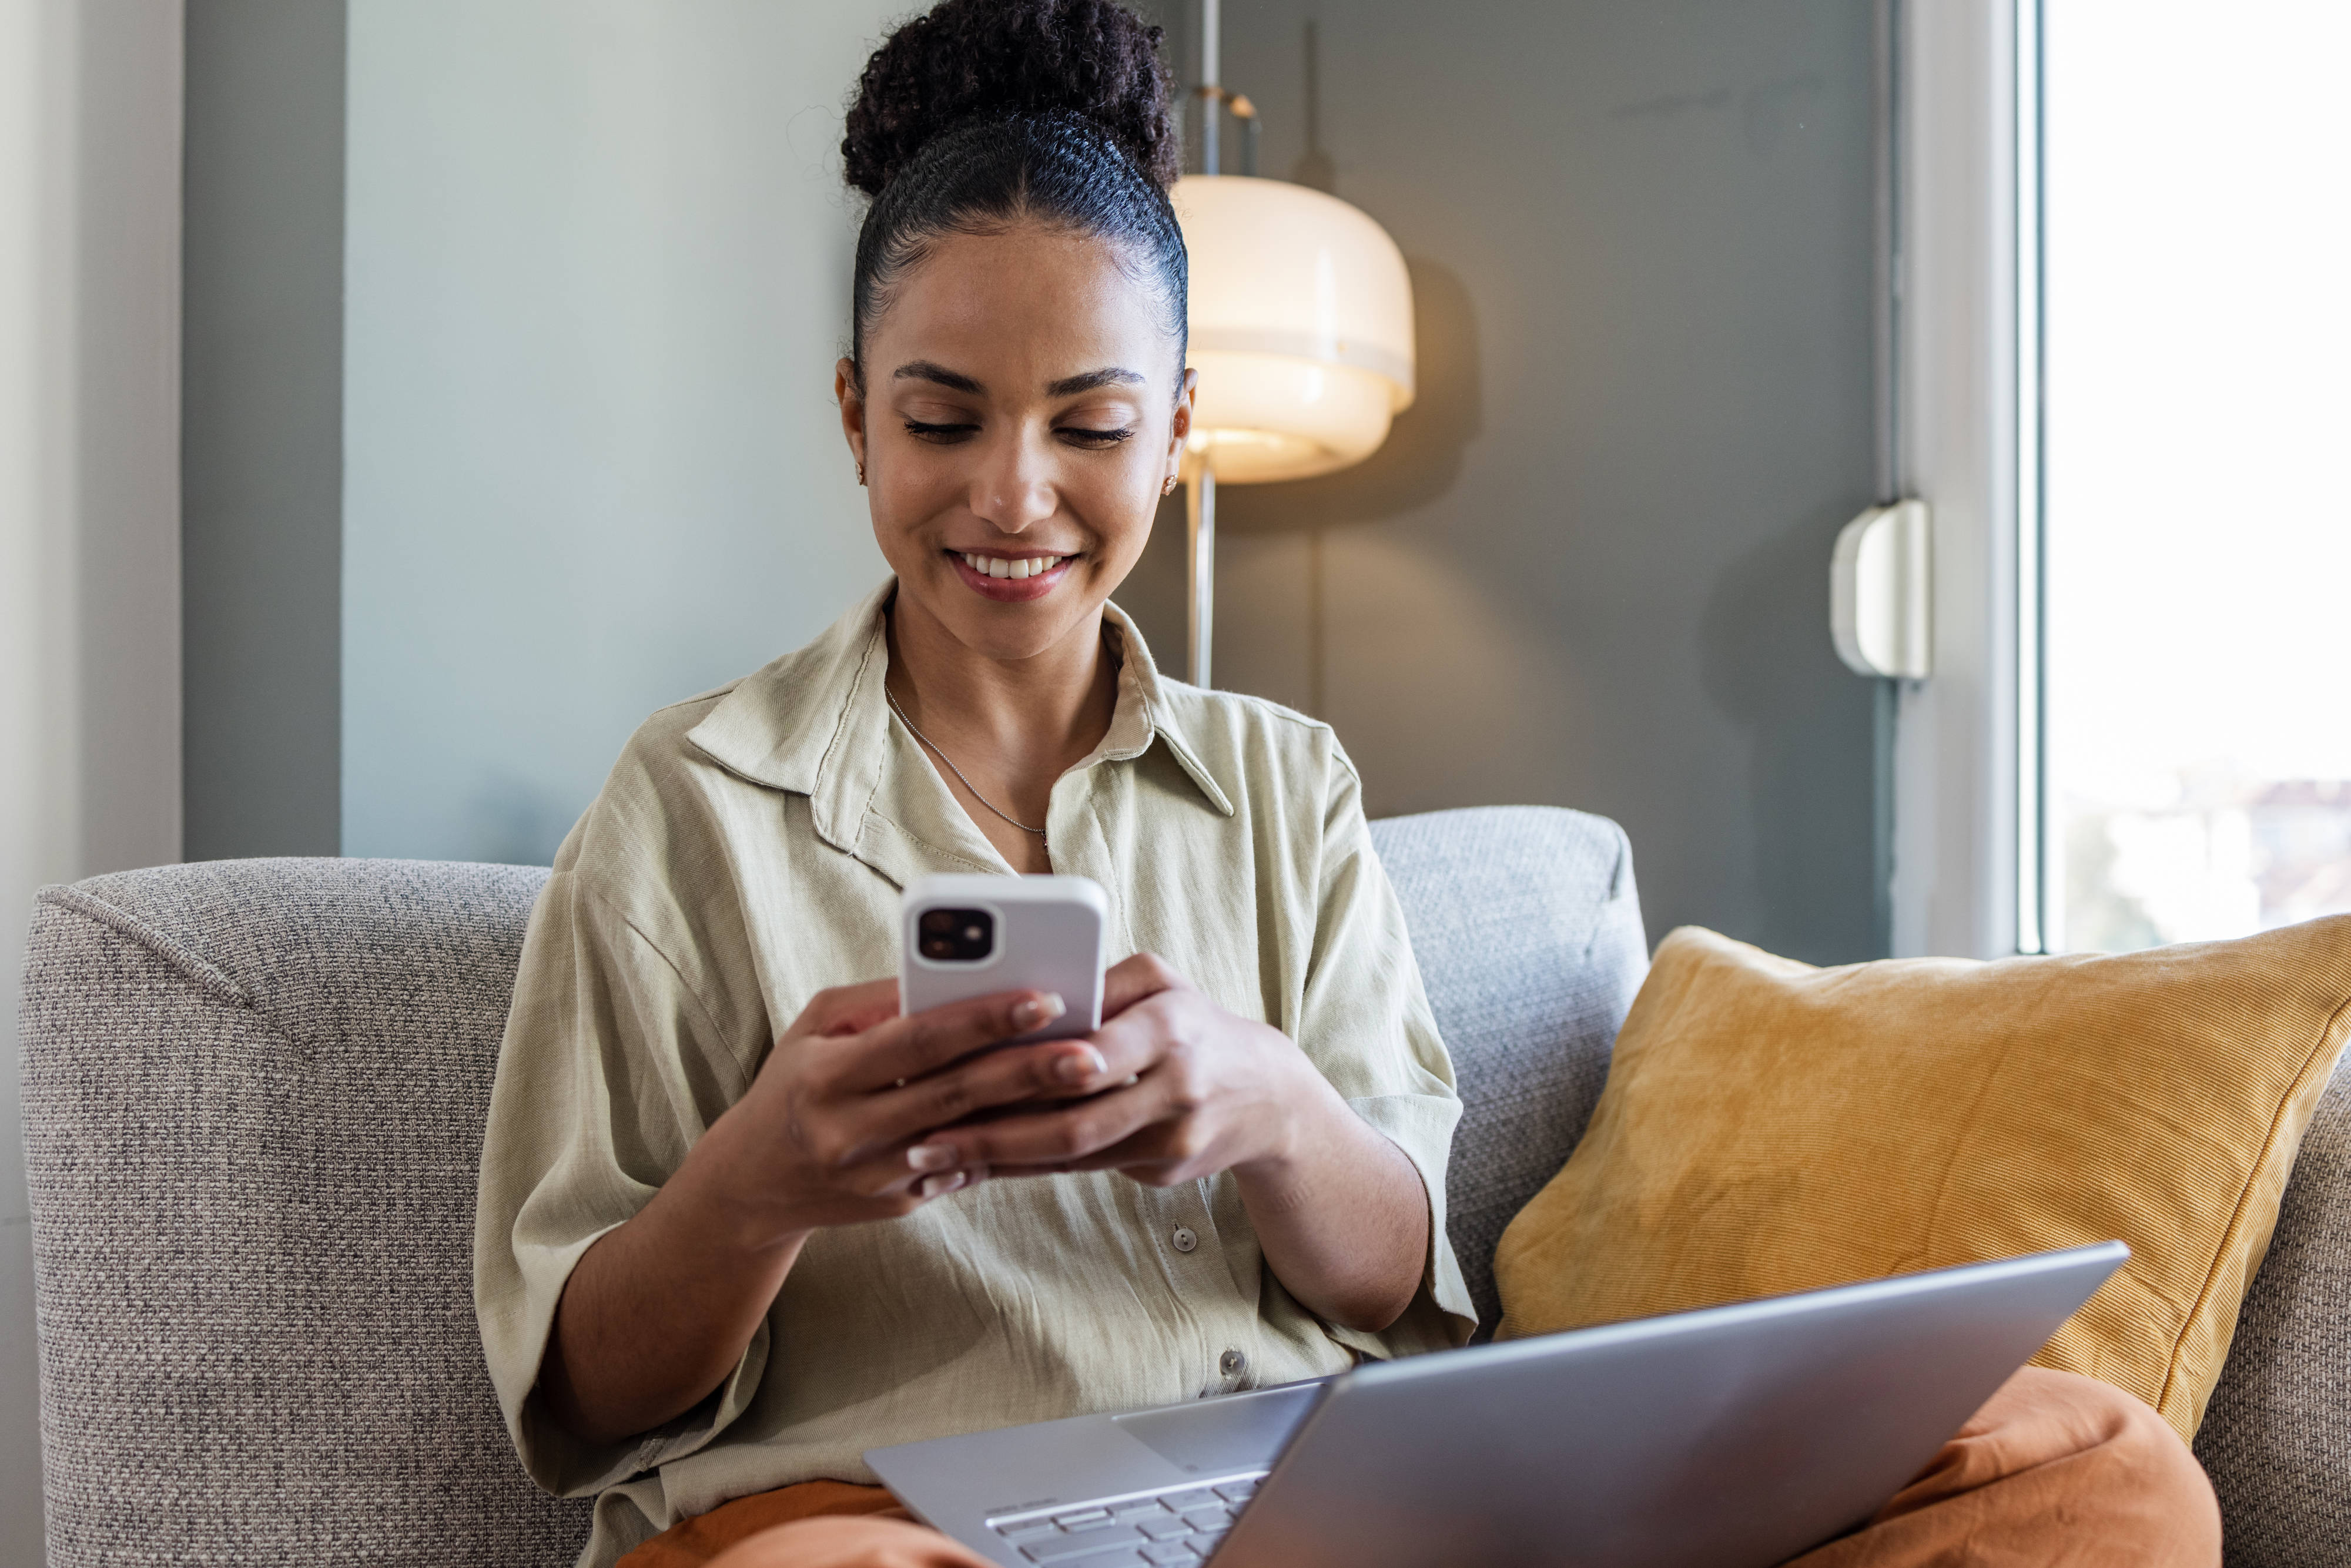 Woman on sofa with laptop, smiling at smartphone in her hands